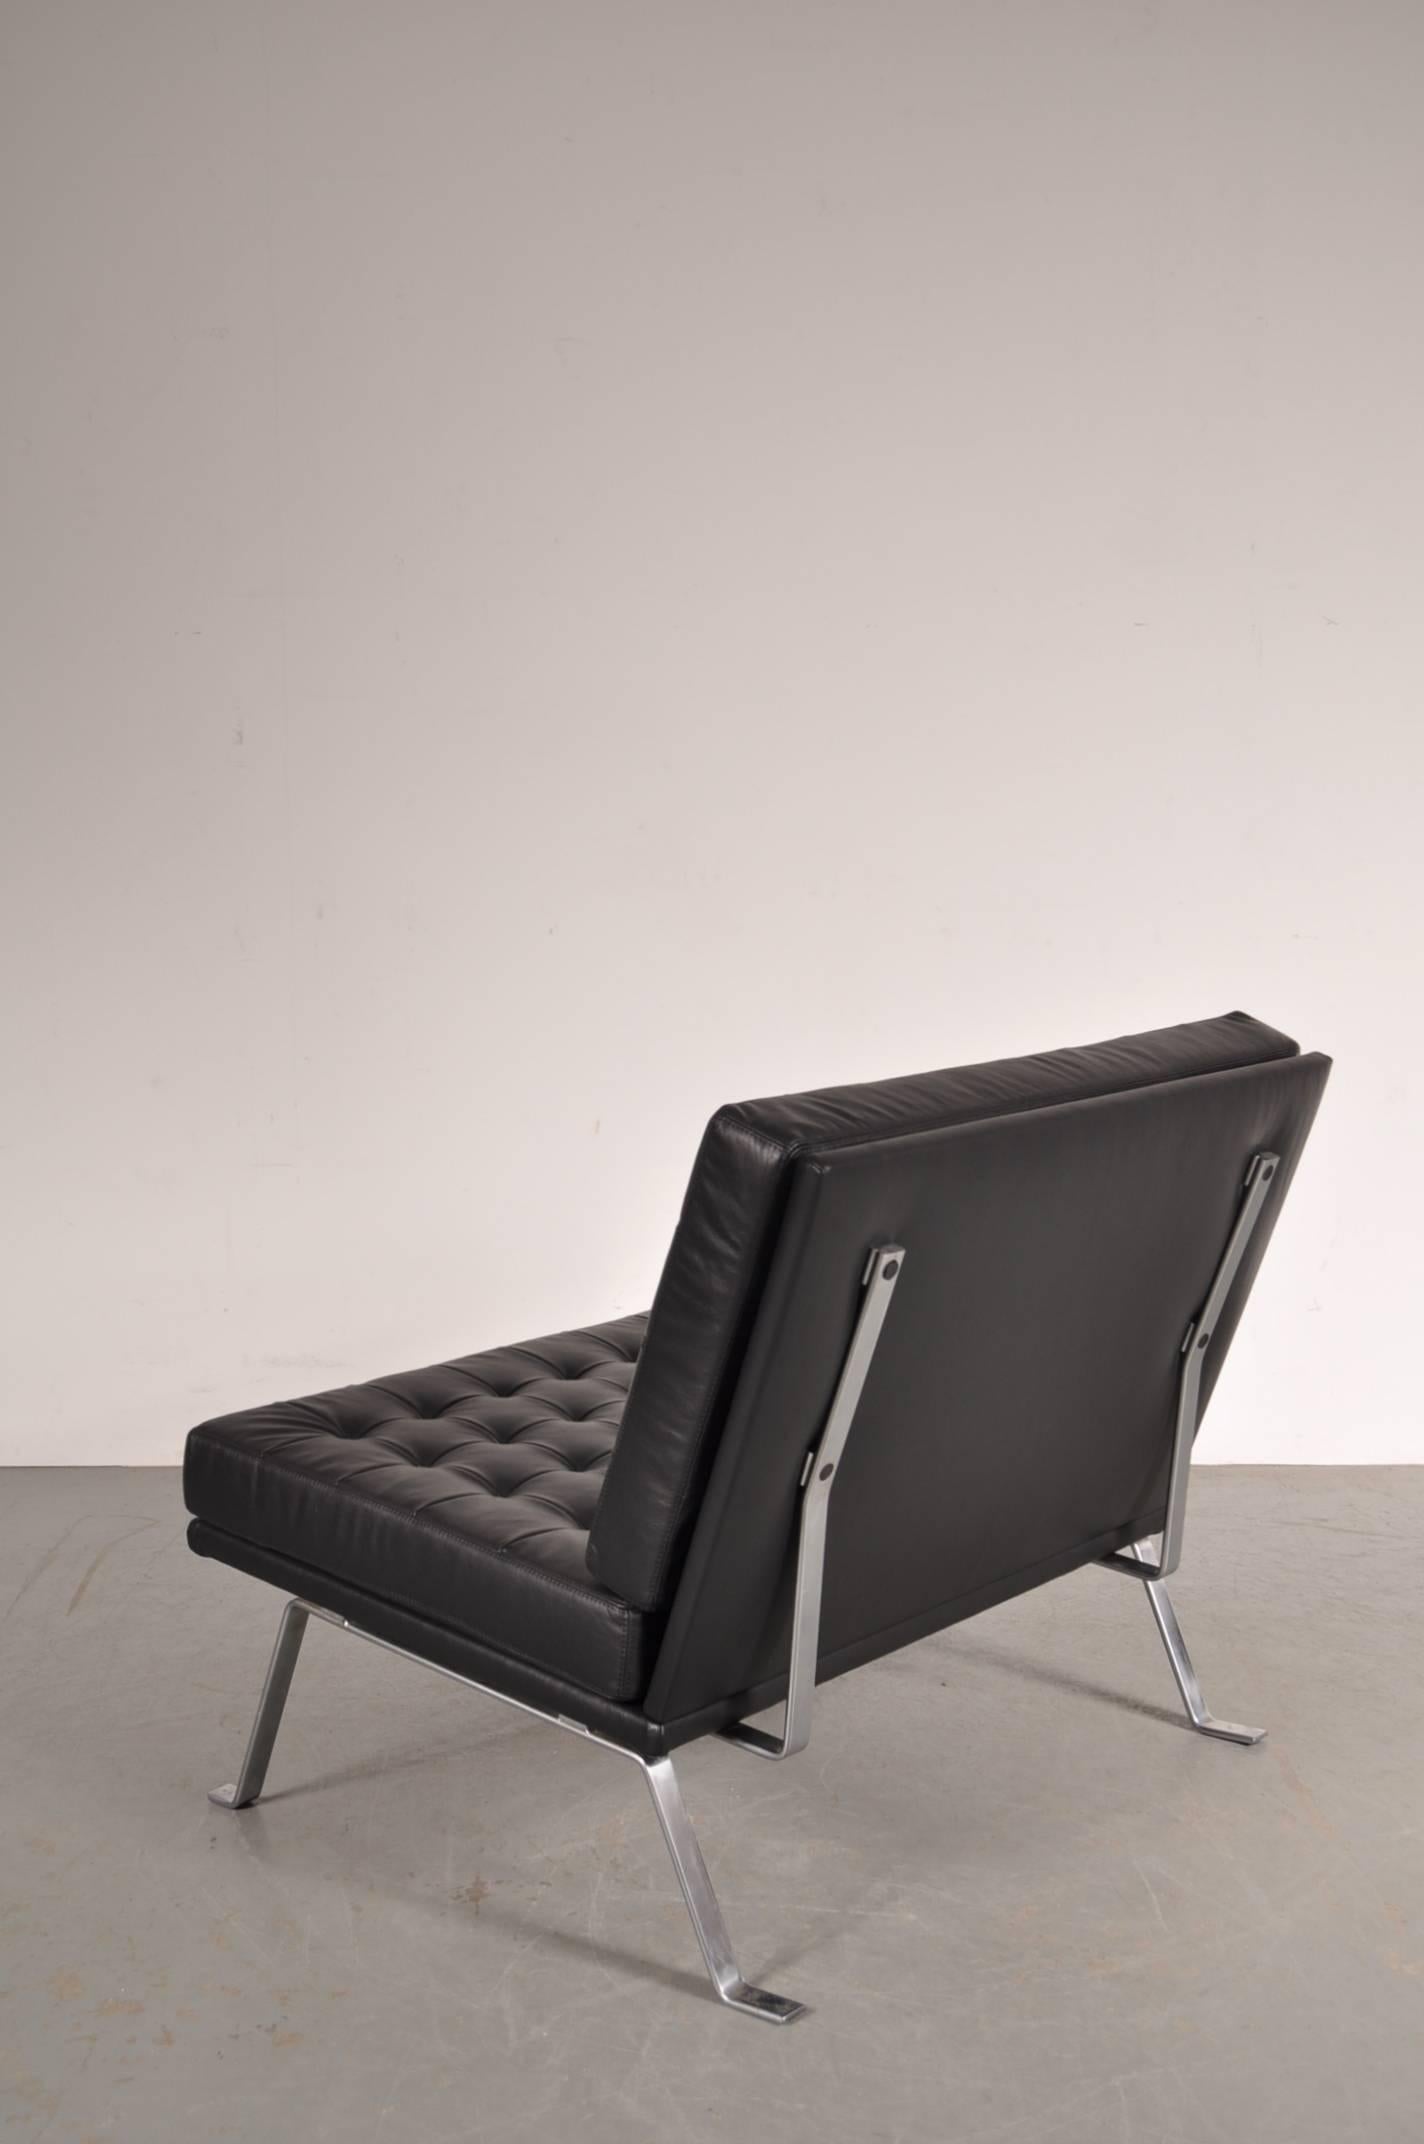 Stunning loveseat designed by Hein Salomonson, manufactured by AP Polak, Netherlands circa 1950.

This chair is a very popular piece of Dutch Design, thanks to it's beautiful yet minimalistic design and high seating comfort. It is upholstered in